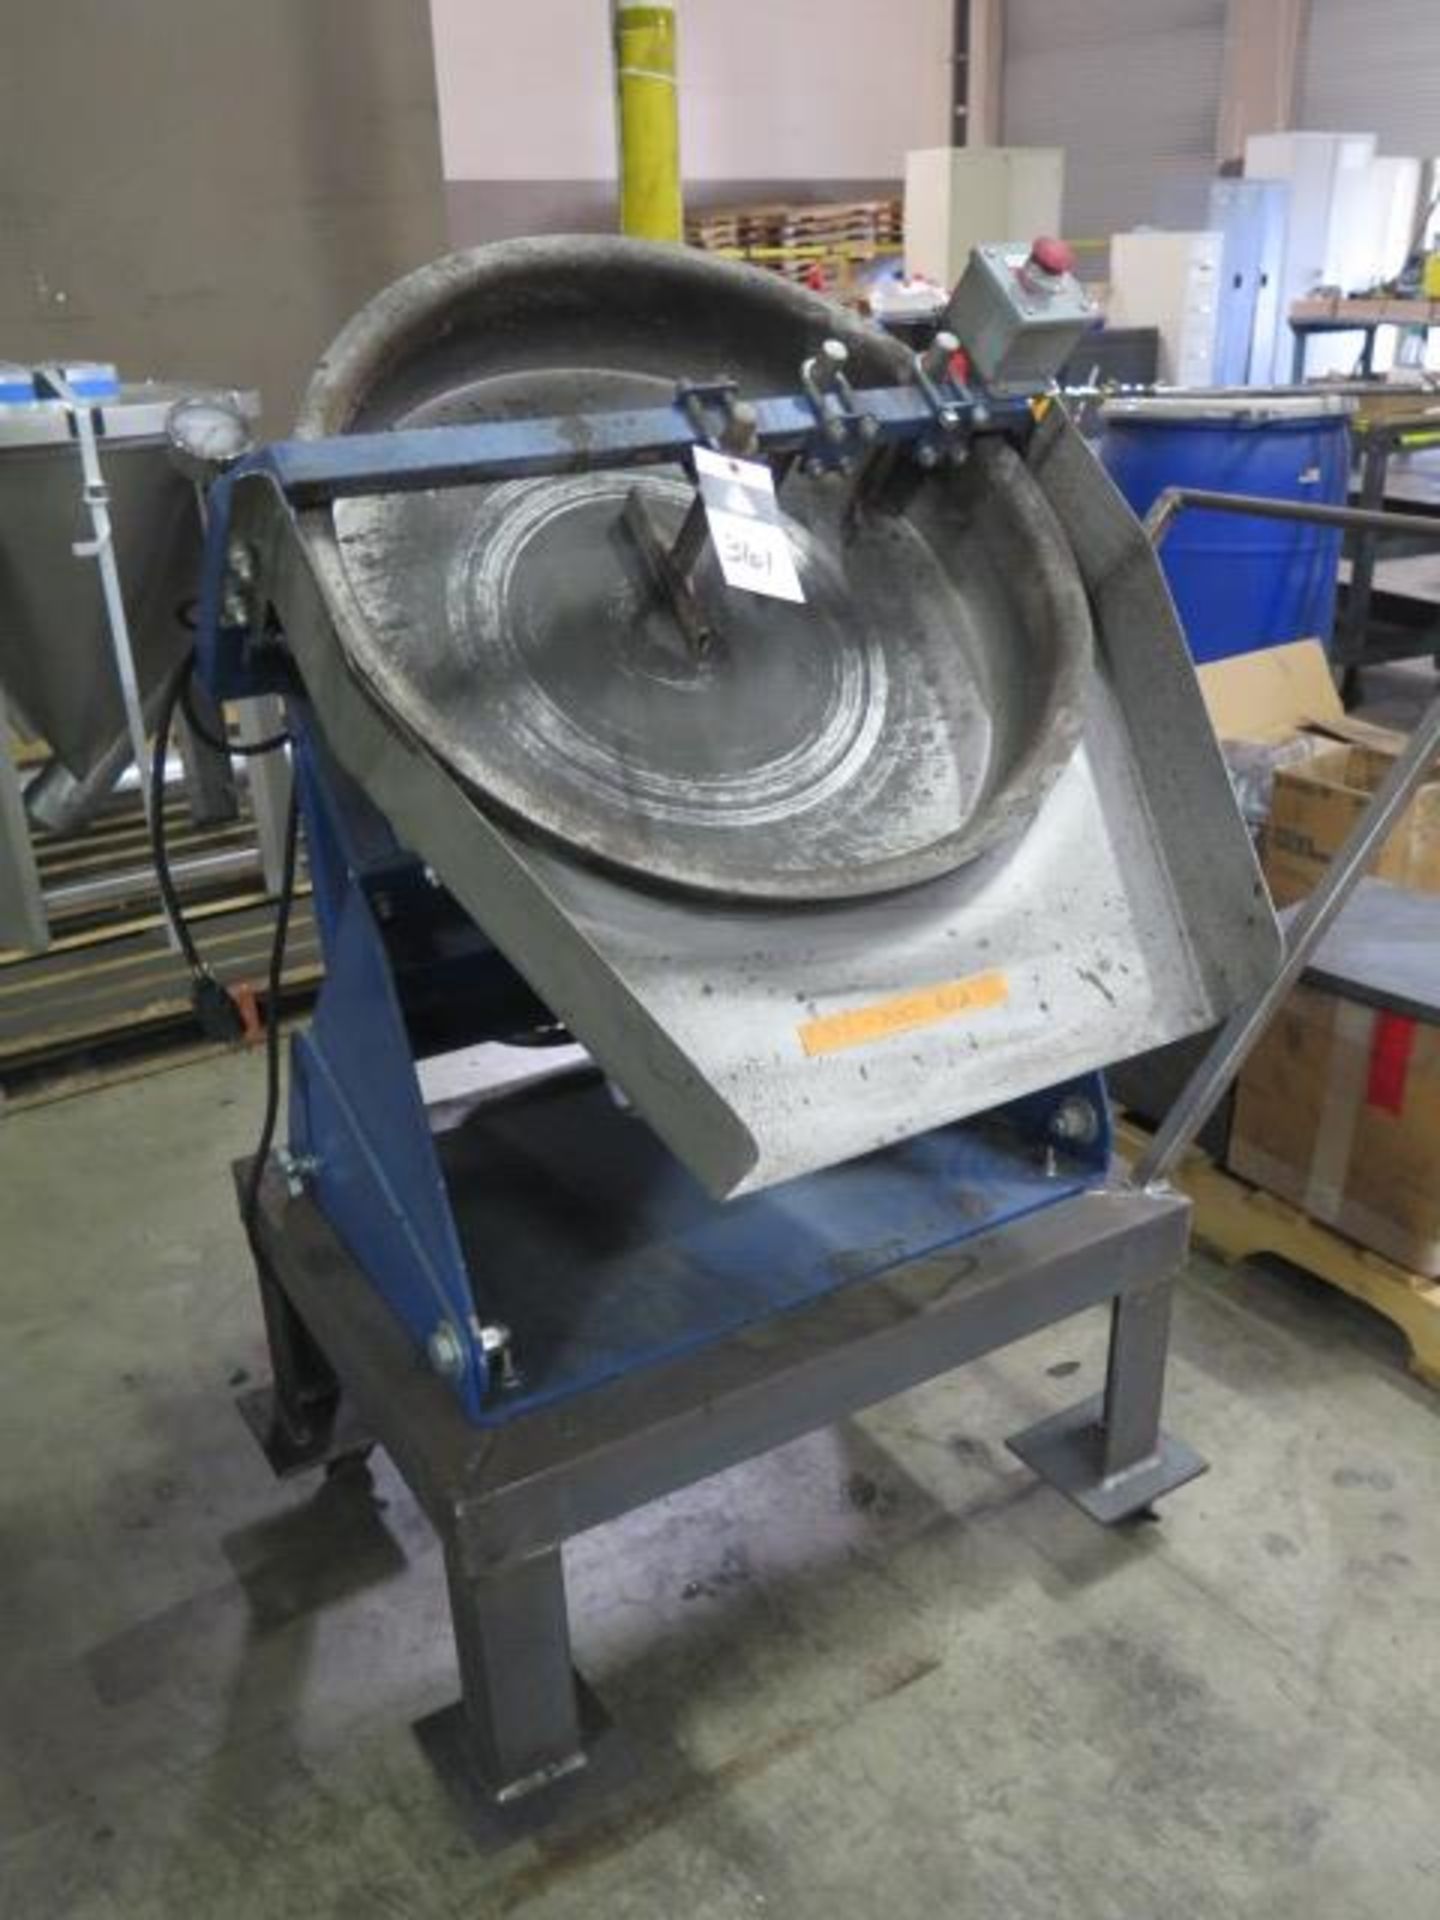 Feeco International Pan Agglo-Miser (Pelletizer) s/n P20134424, SOLD AS IS AND W/ NO WARRANTY